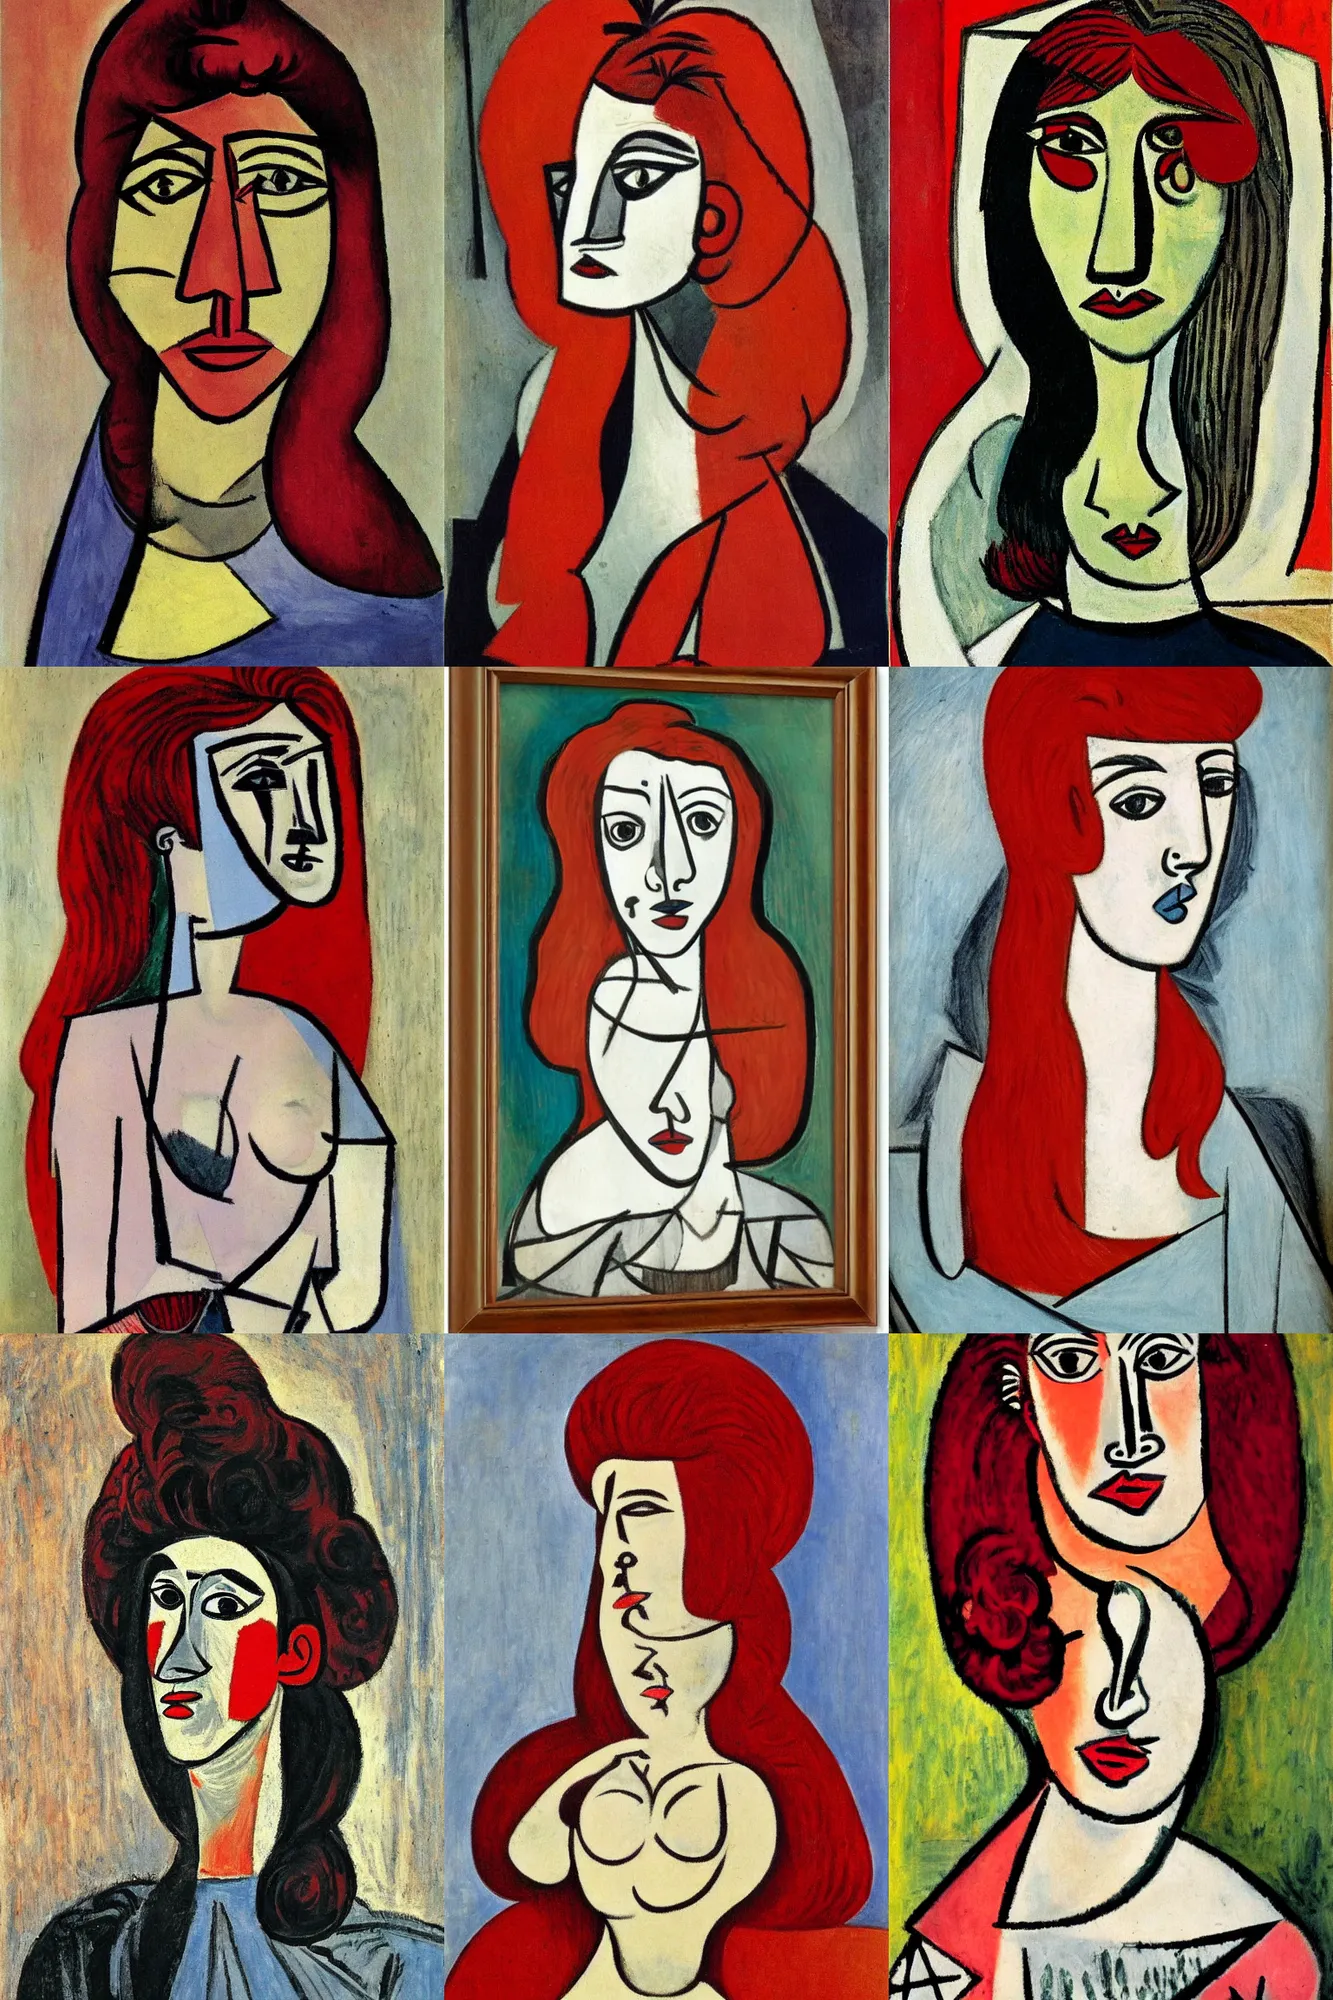 Prompt: Woman with red hair, portrait by Picasso